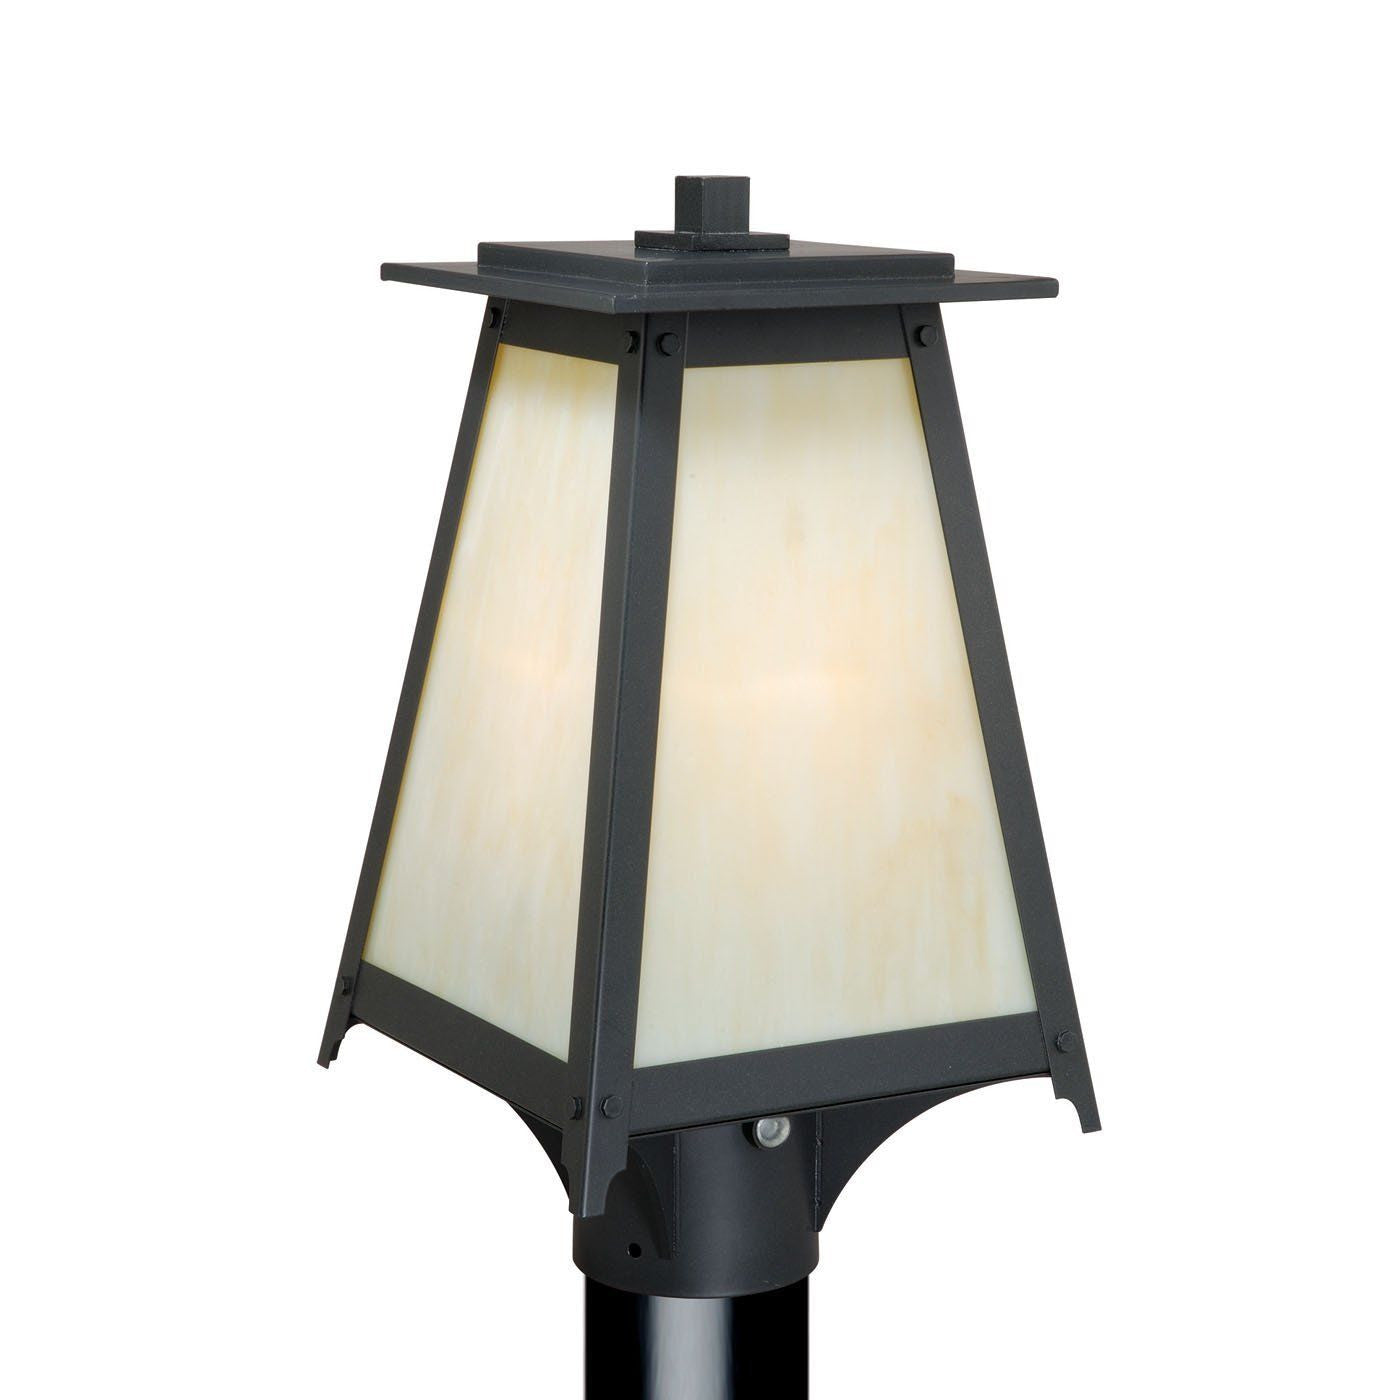 Vaxcel Lighting T0022 Prairieview Collection One Light Outdoor Exterior Post Lantern in Oil Rubbed Bronze Finish